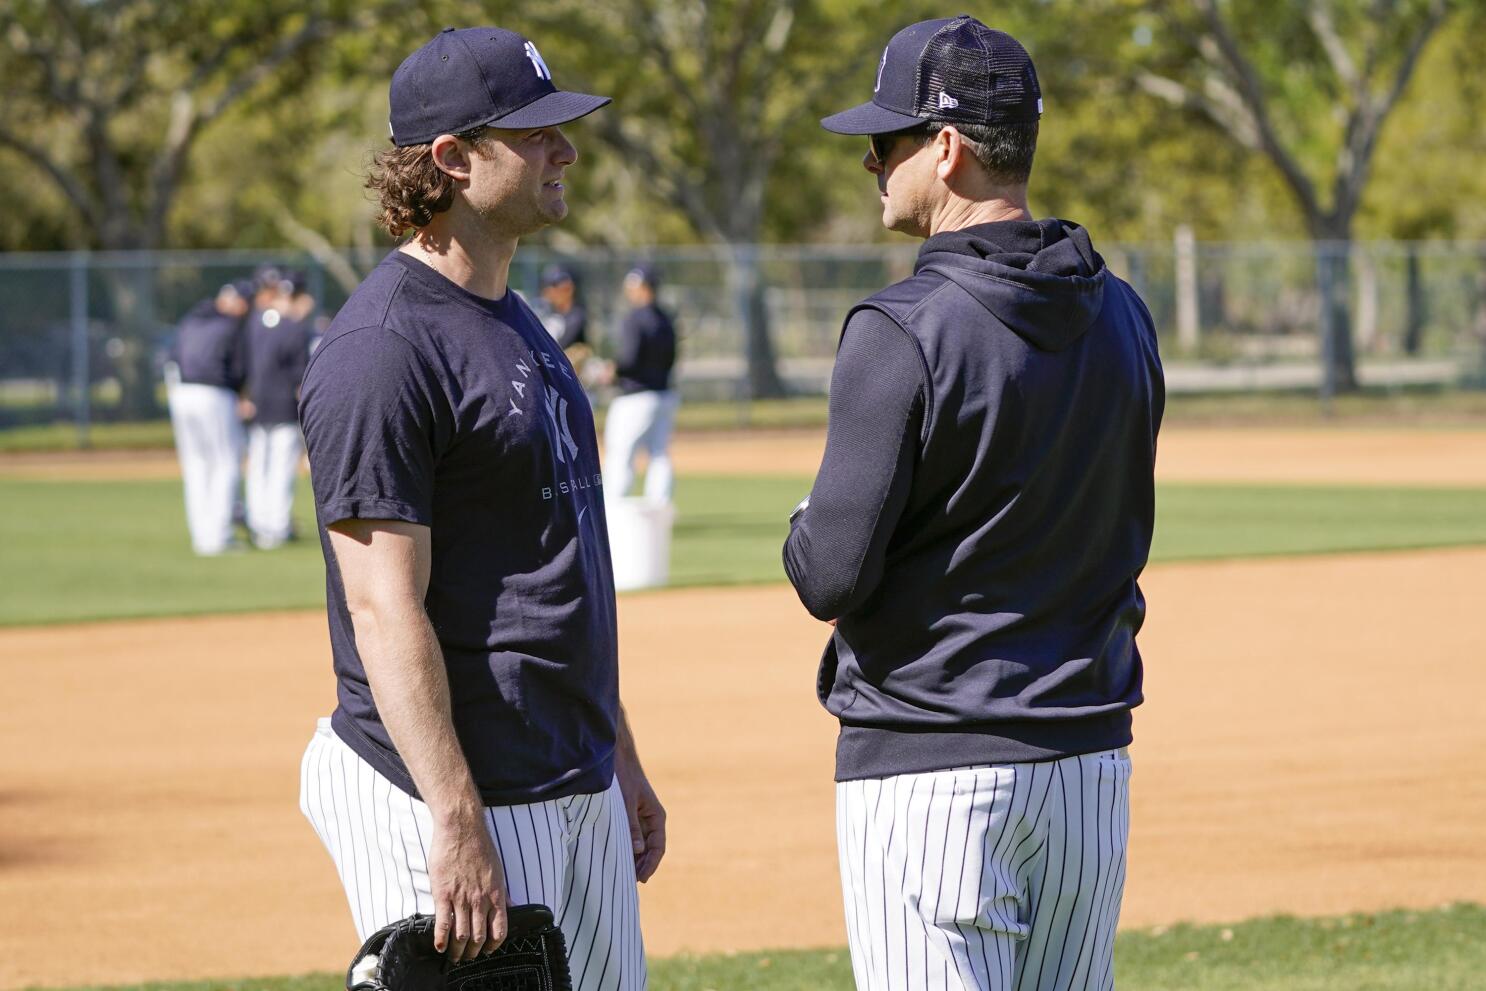 Yankees putting 16 pitchers on opening-day roster; Bird back